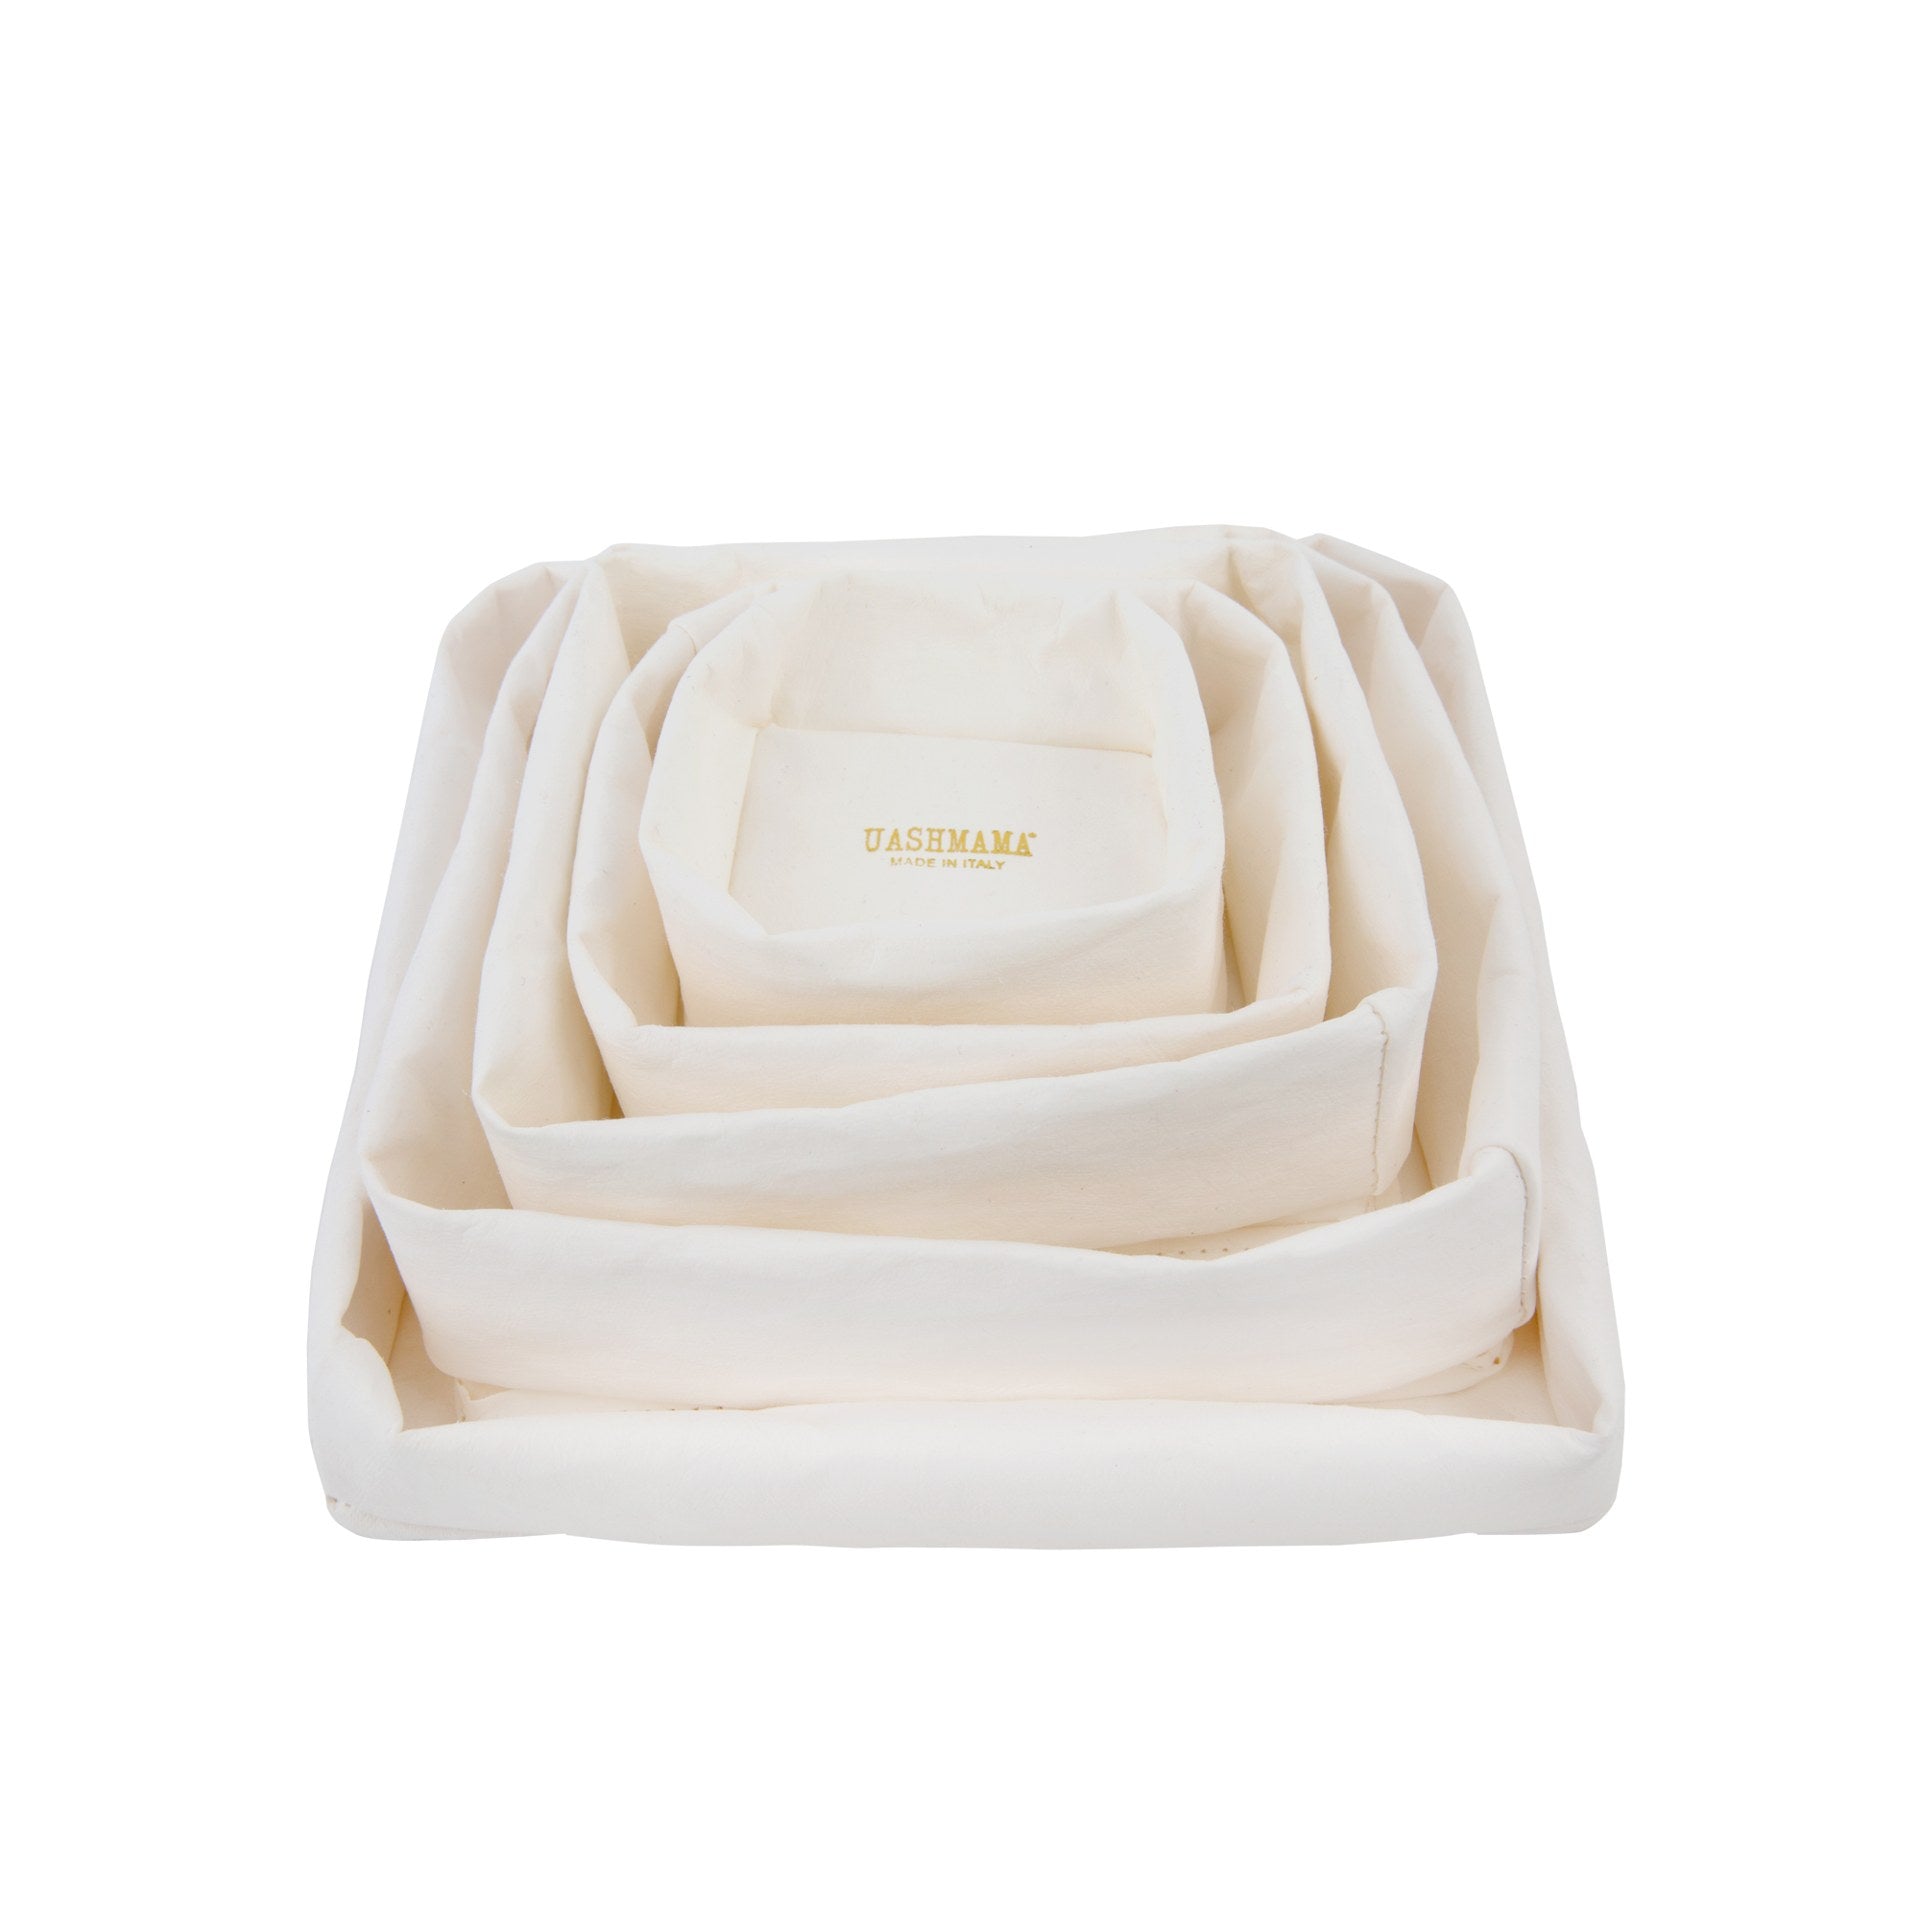 A stack of five washable paper trays is shown in white, one inside the other as a nest. 